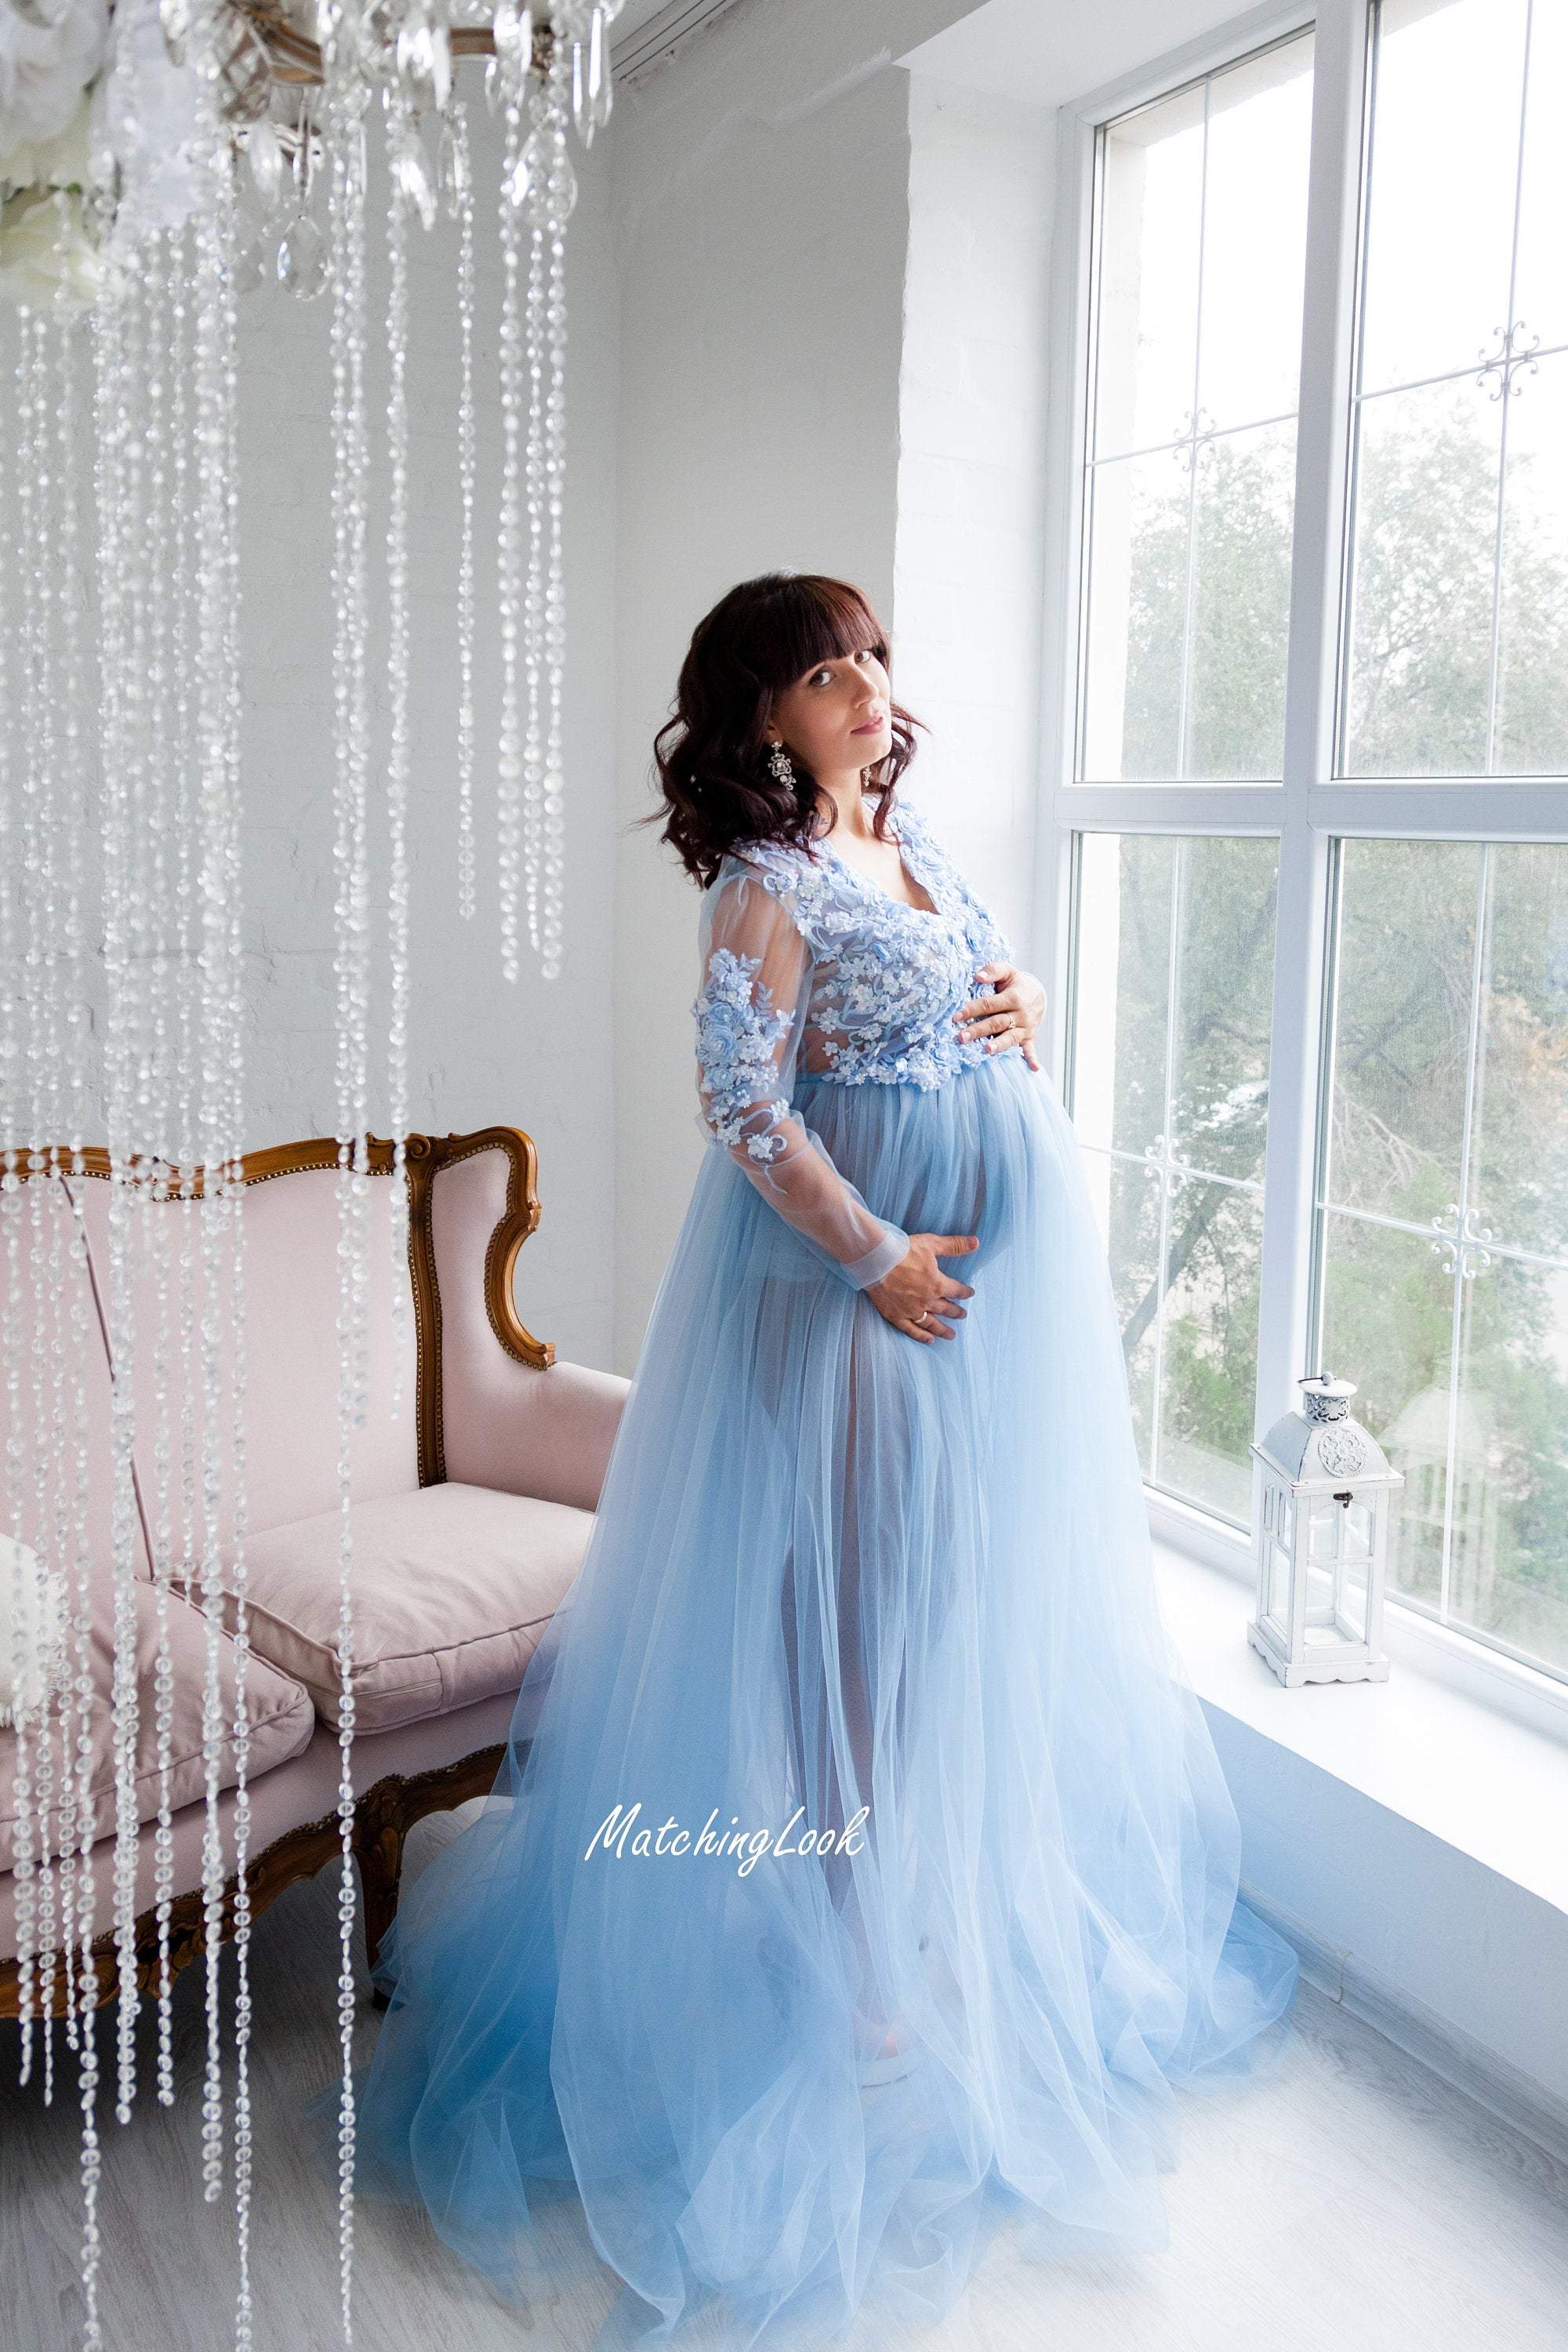 Baycosin Maternity Photo Props Dress Long Sleeve Off Shoulders Half Circle  Gown for Baby Shower Dresses - Walmart.com